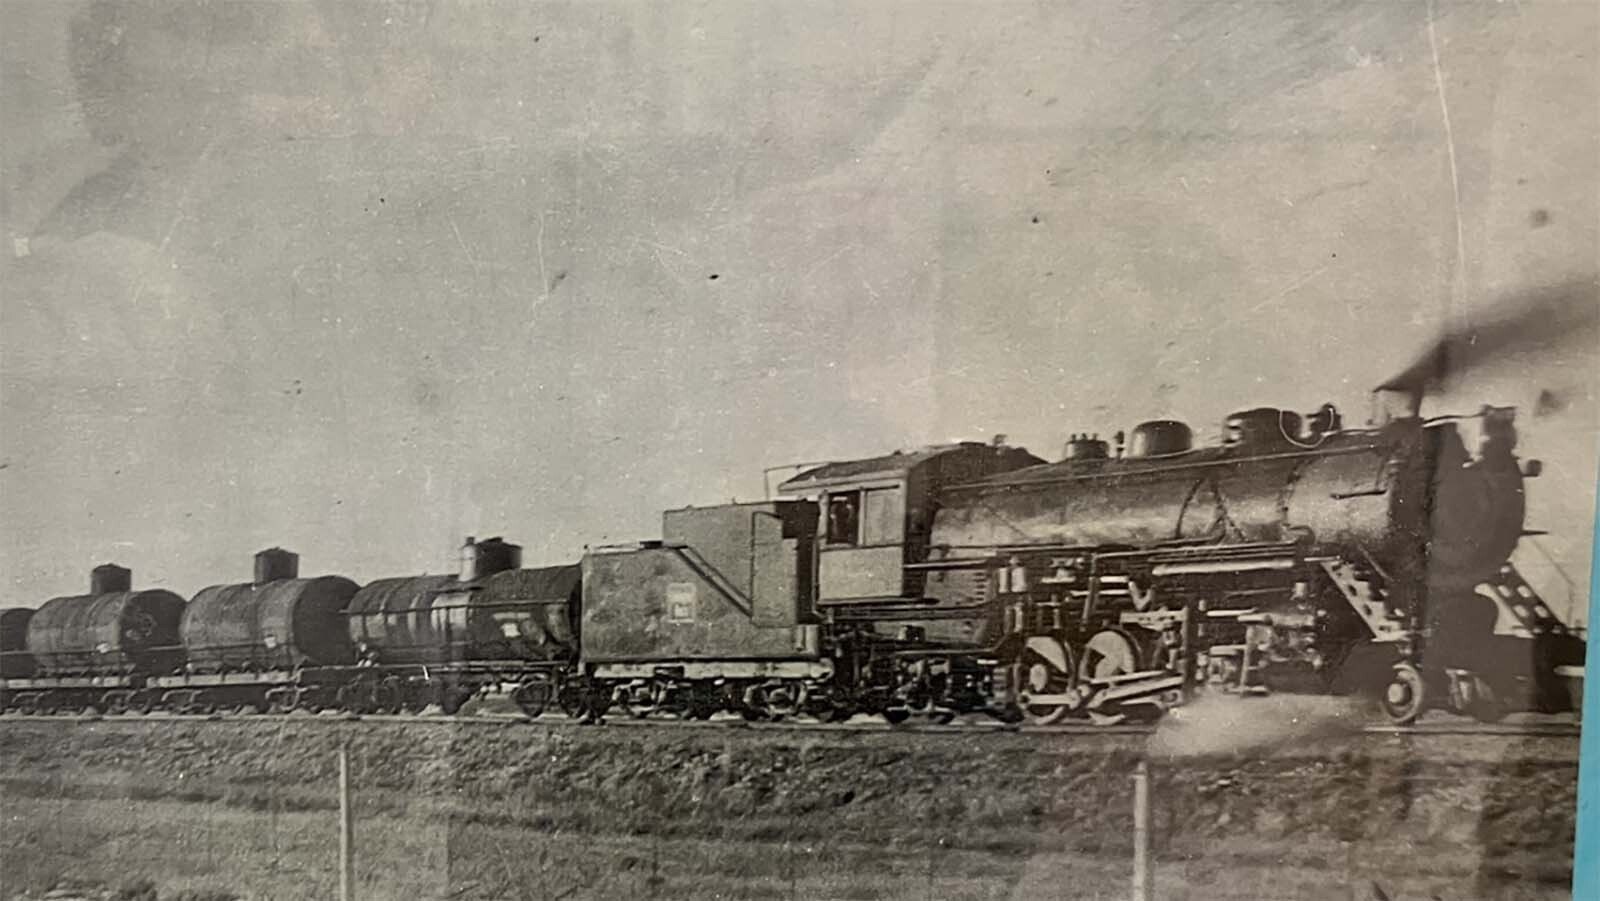 A photo at the Salt Creek Museum shows a North South train making its way with oil cars. The railroad brought a big boost to the oil field’s efforts from 1923-1935.